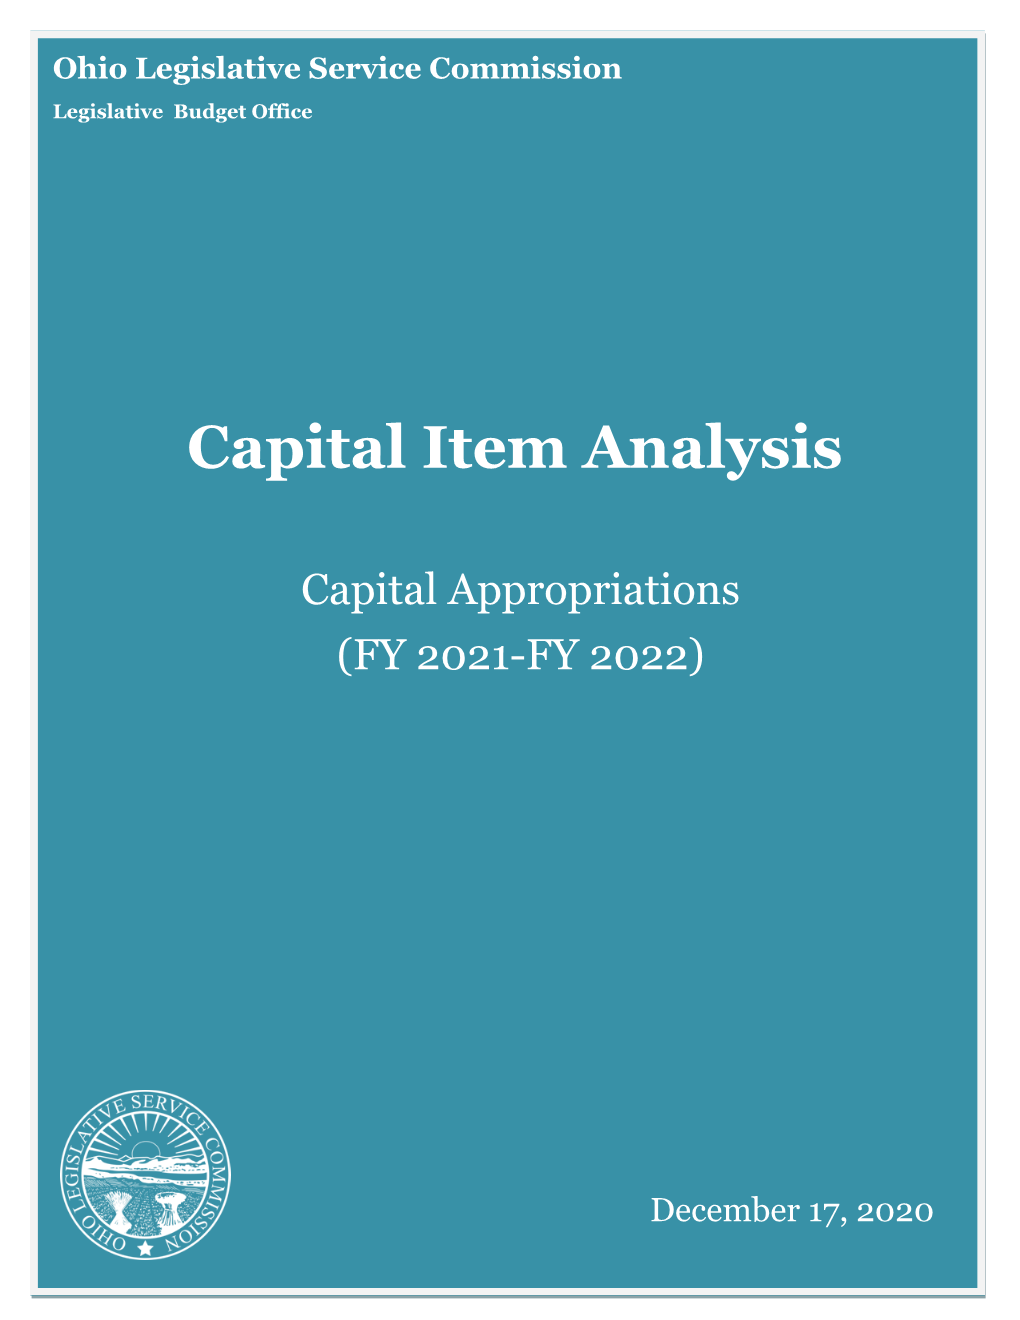 Capital Budget Analysis Table of Contents